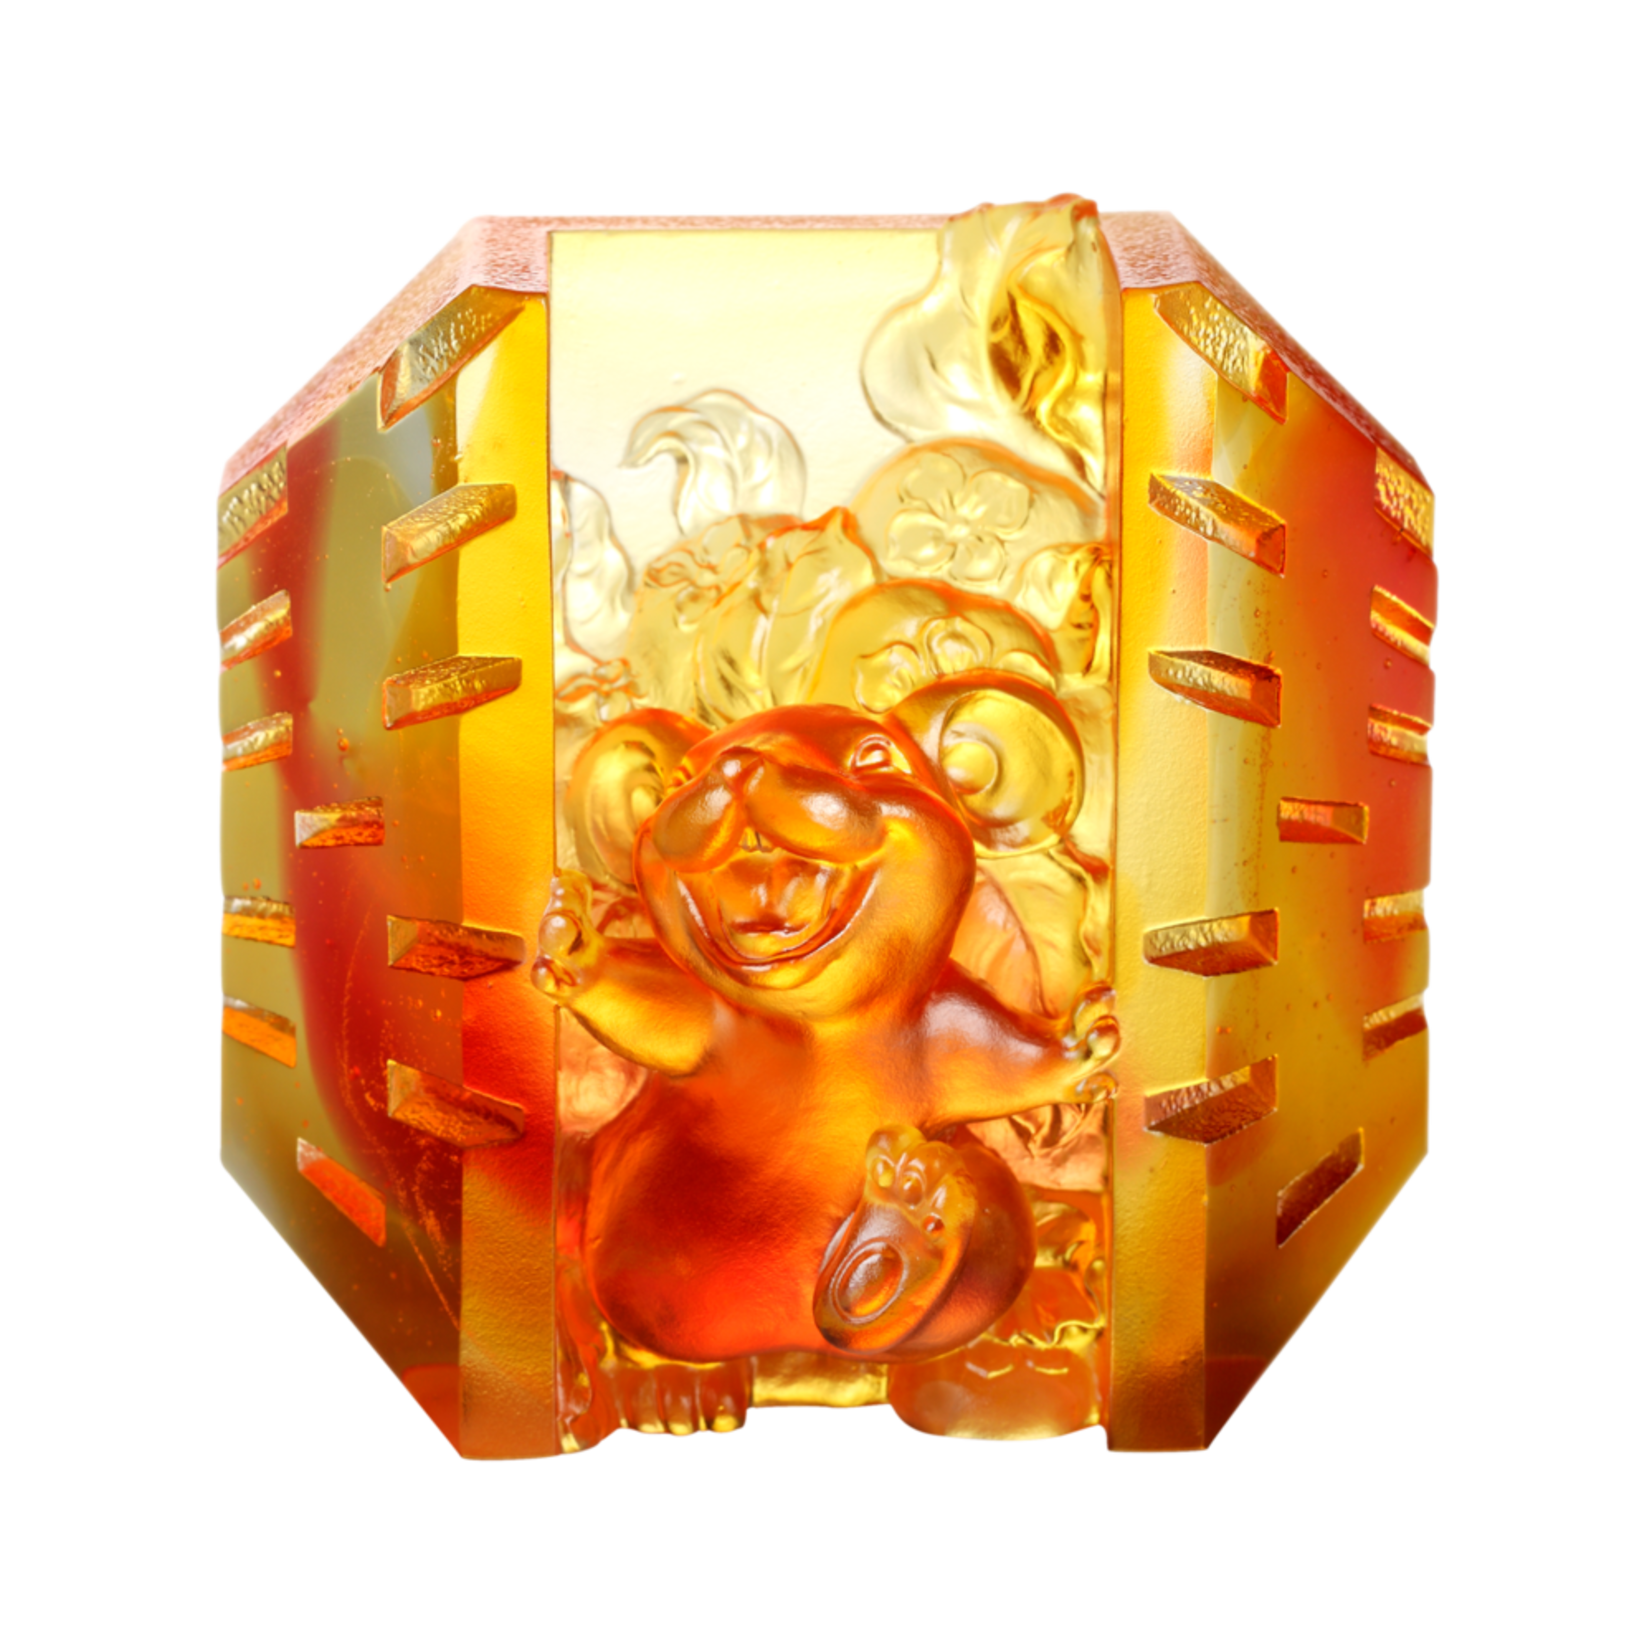 LIULI Crystal Art Crystal Mouse "Open to Joy" (Limited Edition) Zodiac Sculpture (Amber / Gold Red)